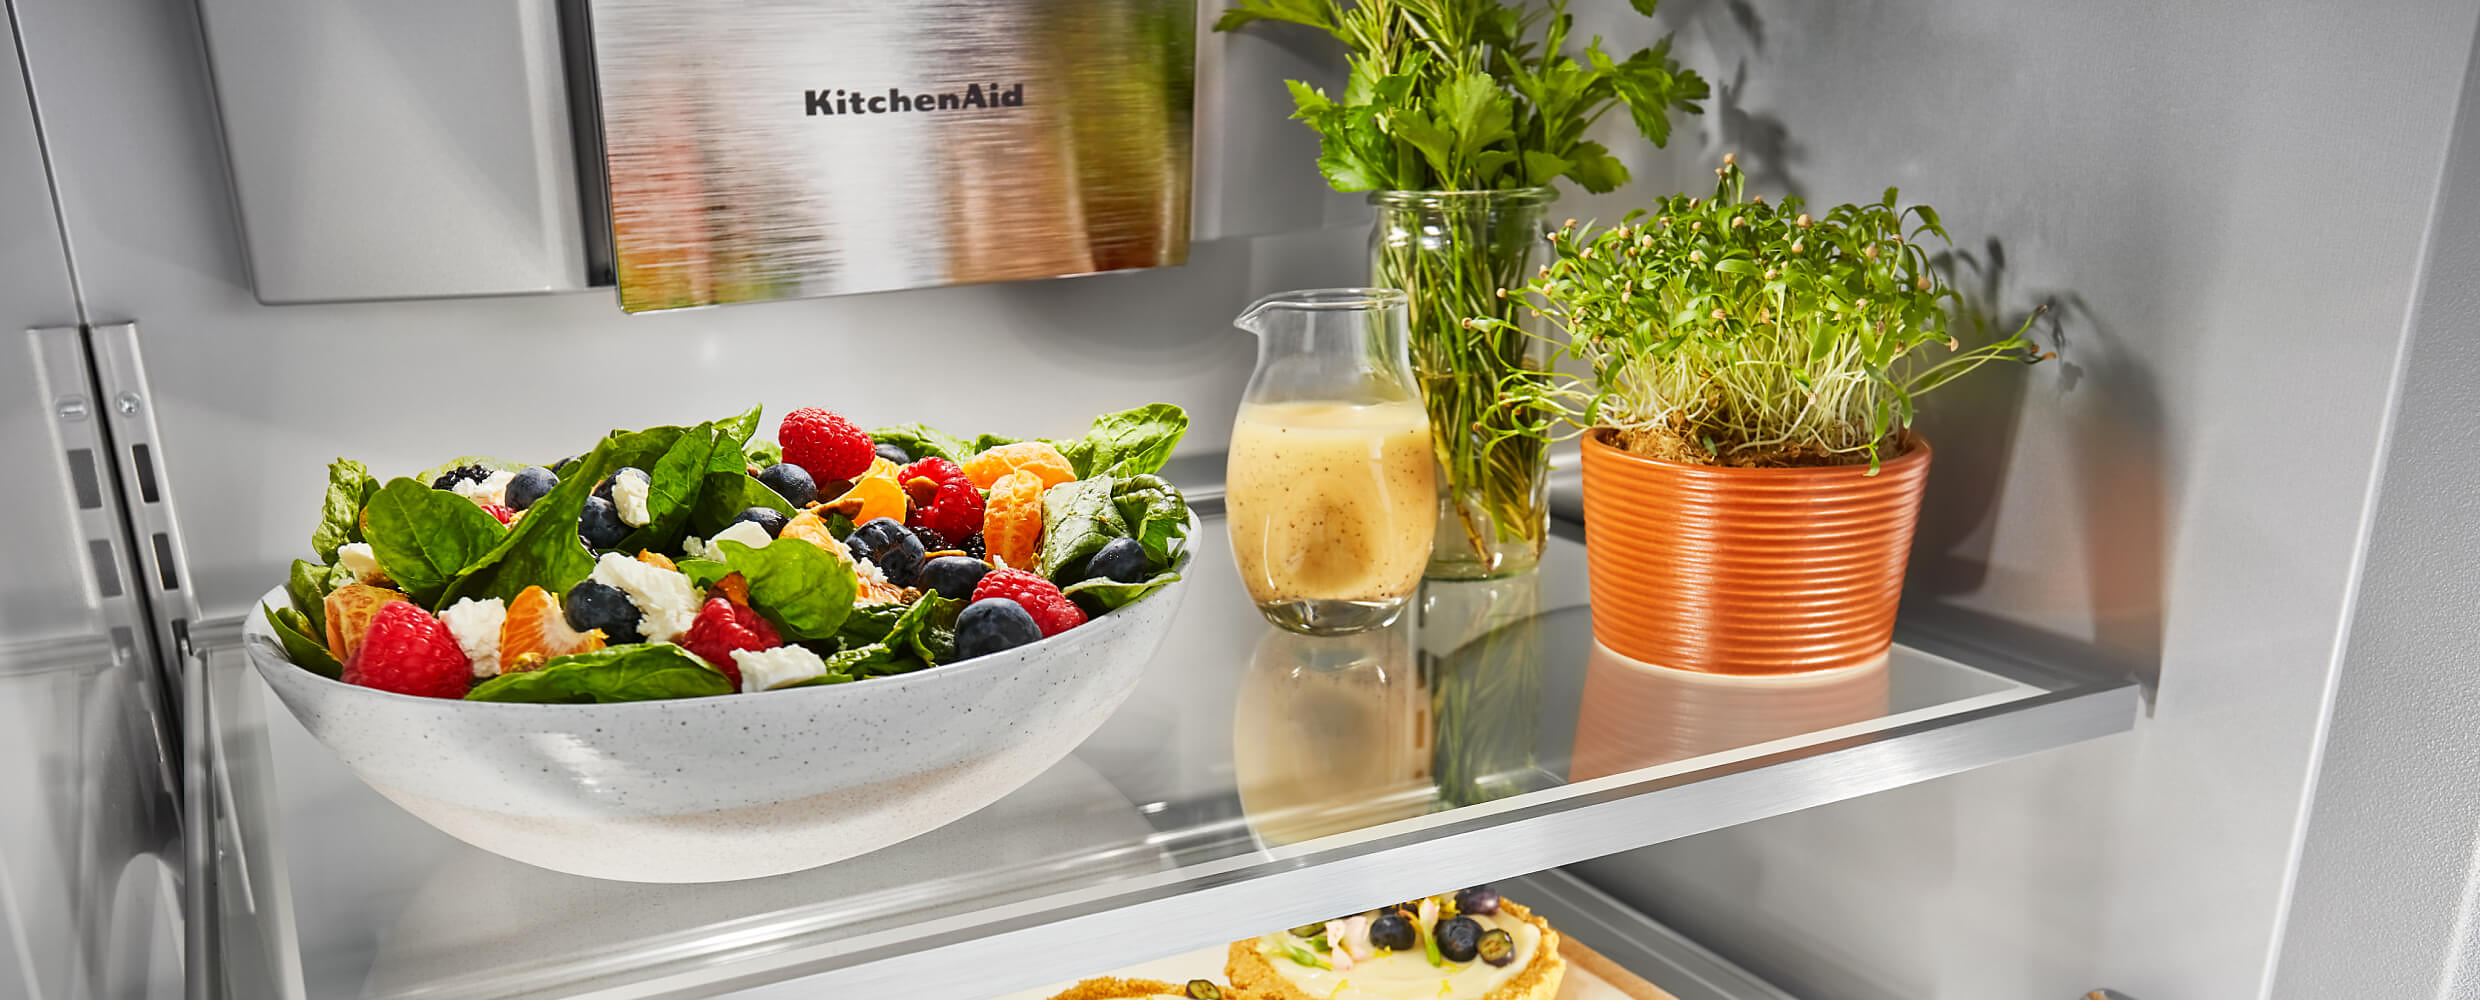 Interior of a 48" KitchenAid® Built-In Side-by-Side Refrigerator filled with a large fresh salad, beverages and herbs